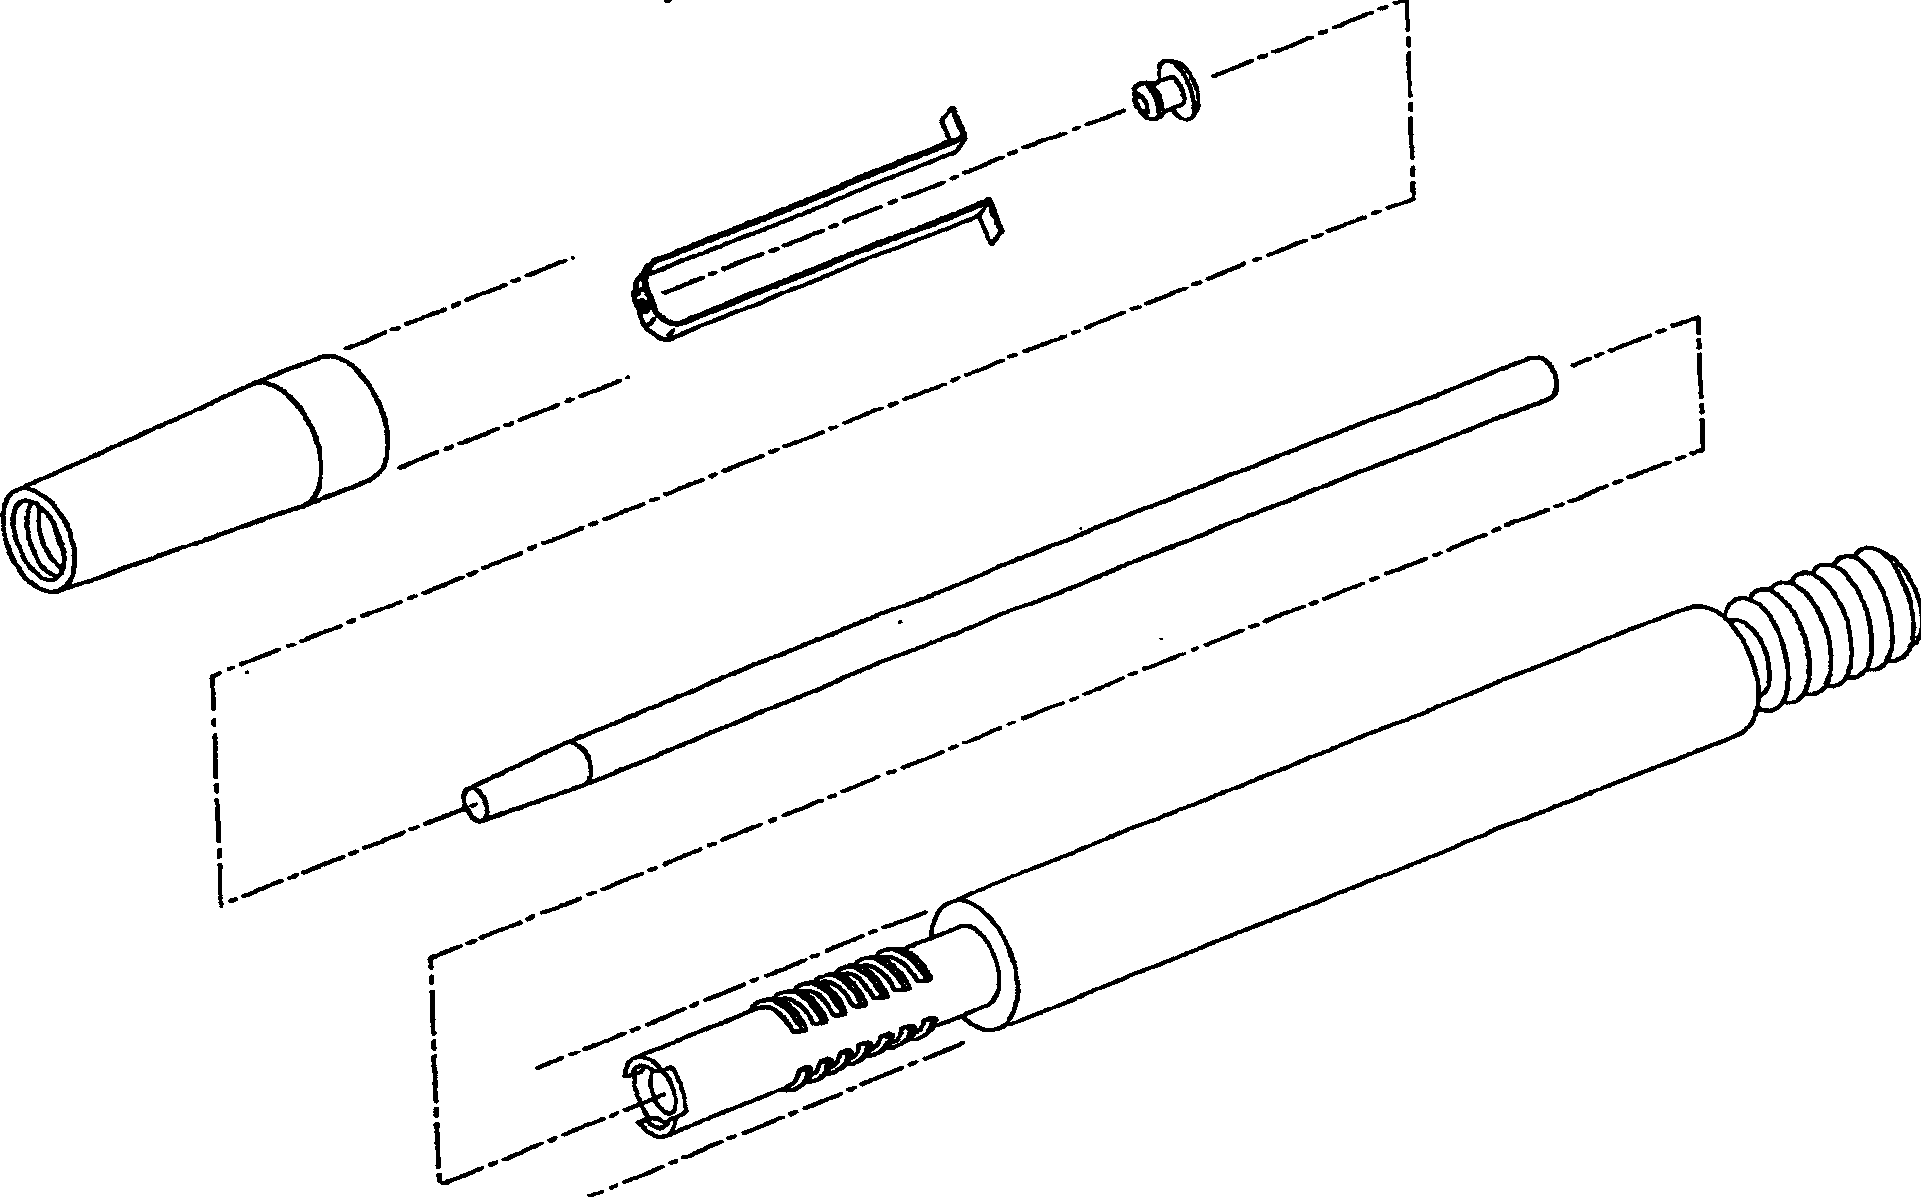 Insertion tool for ocular implant and method for using same